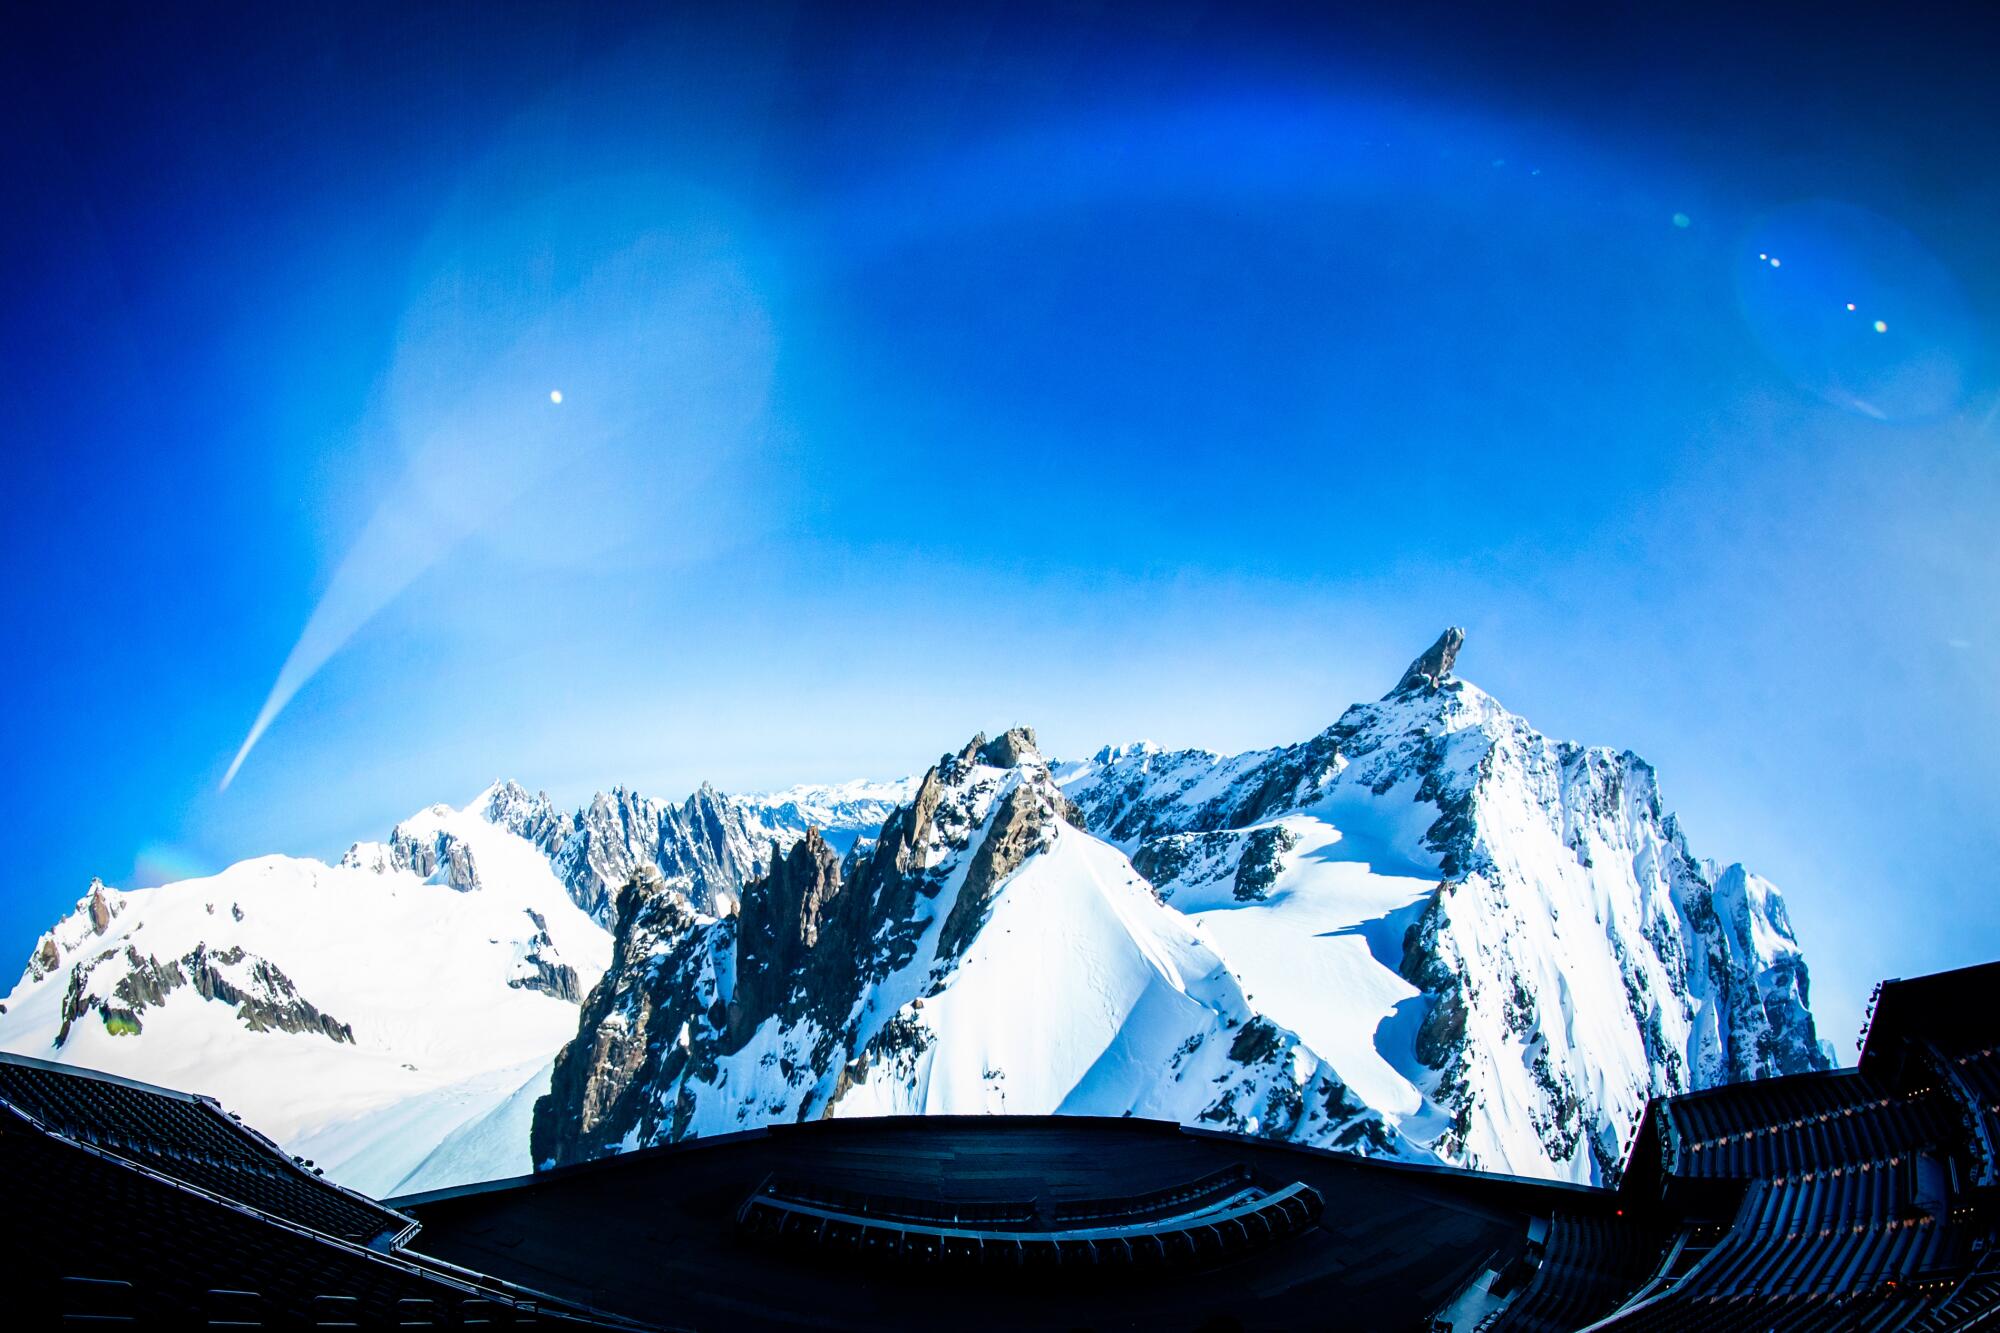 The snow capped tip of rocky mountains emerge are seen on a massive circular screen in an empty theater